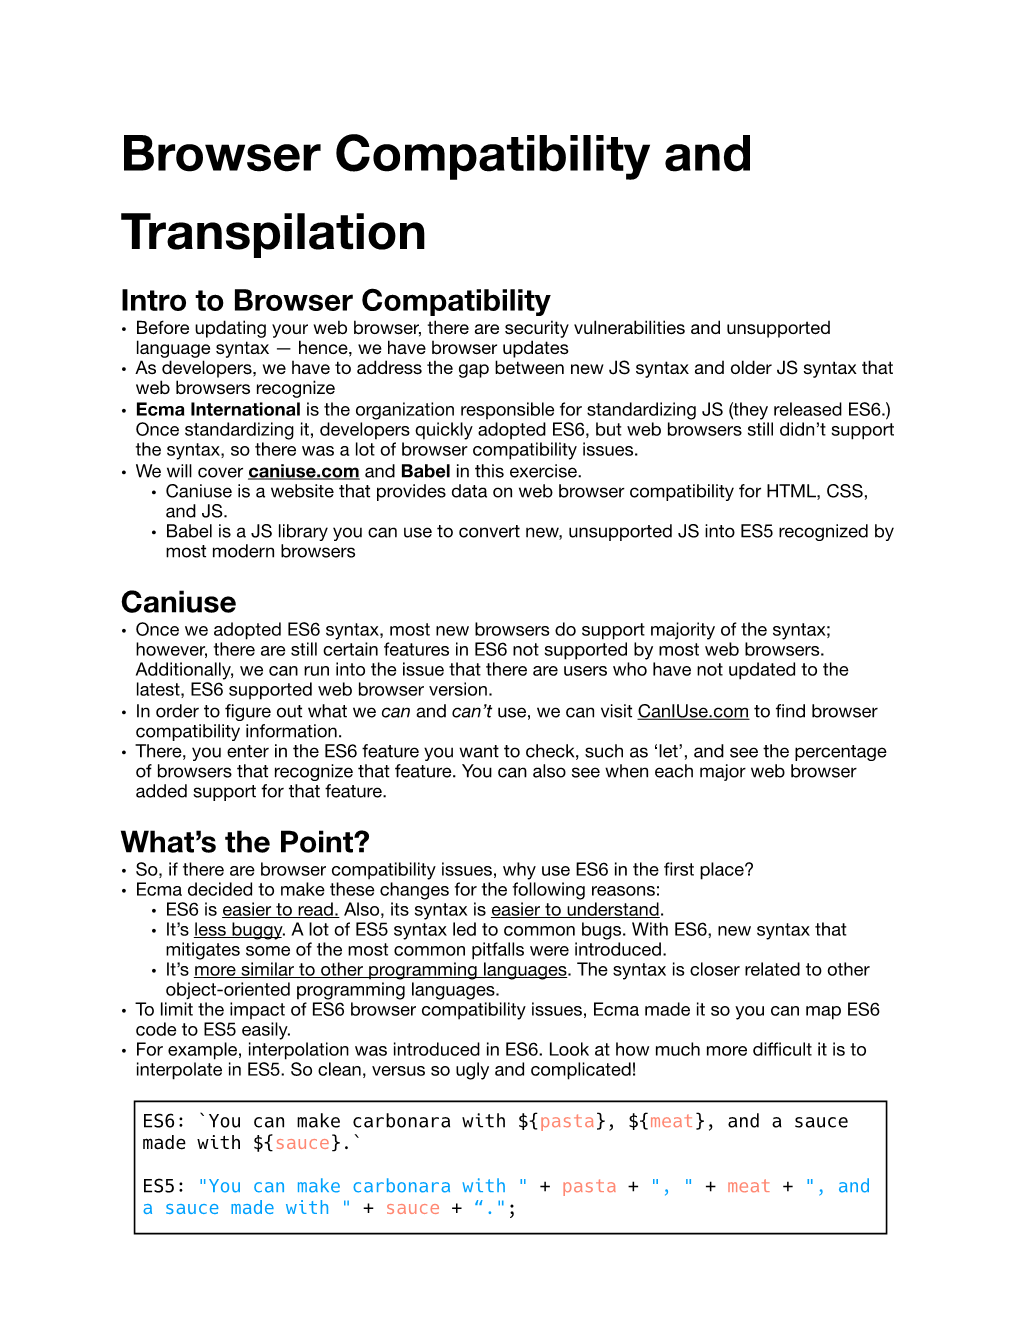 Browser Compatibility and Transpilation.Pages